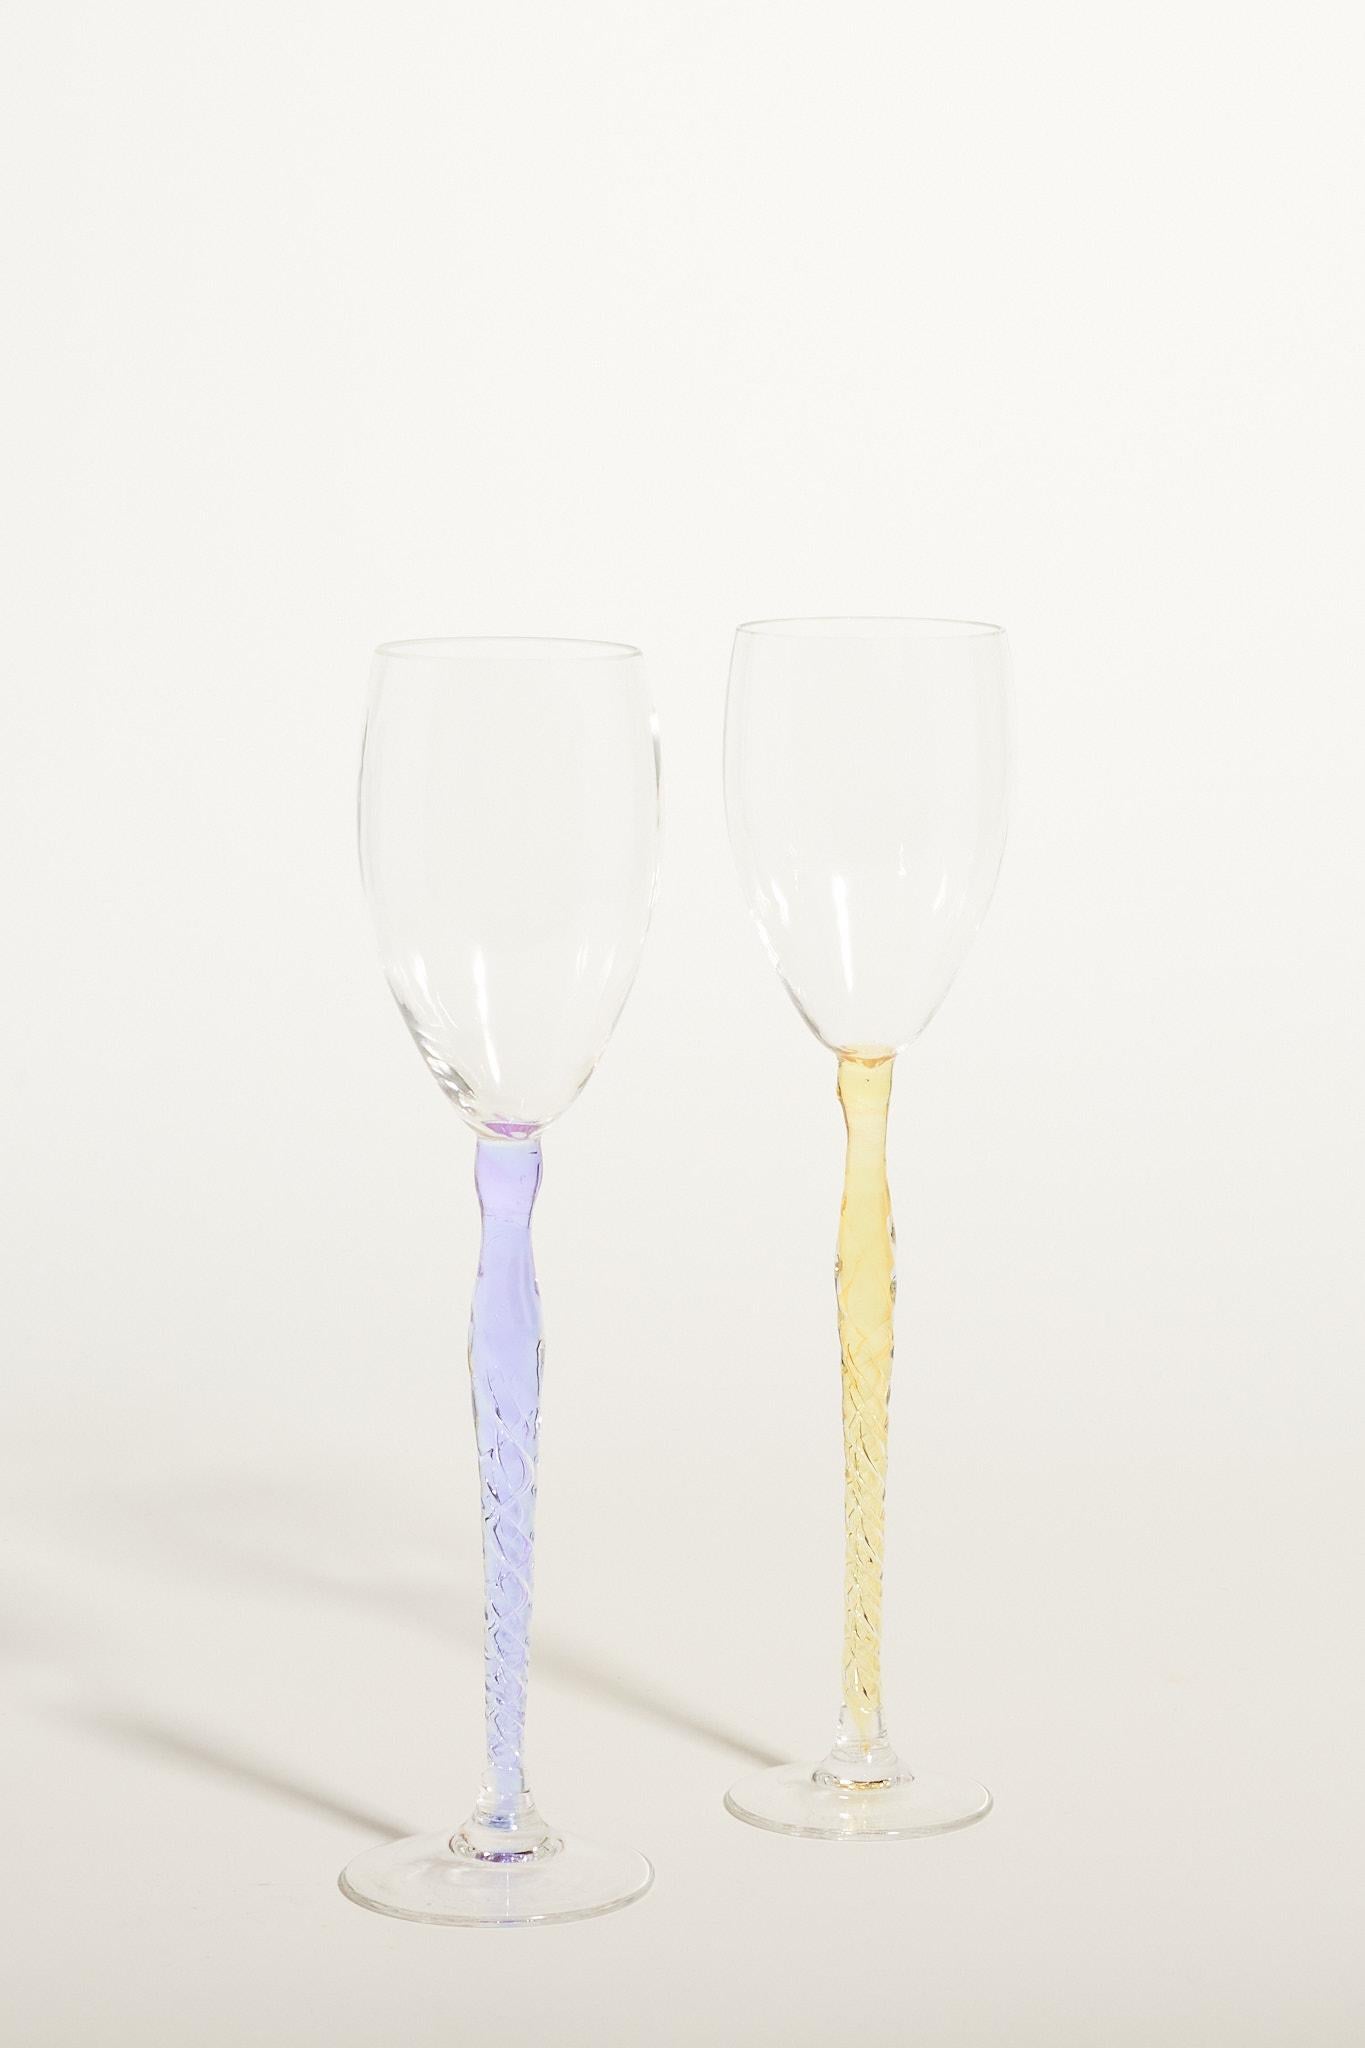 Artist set of two elegant champagne/wine glasses with twisted long stems in pale lilac and lemon.